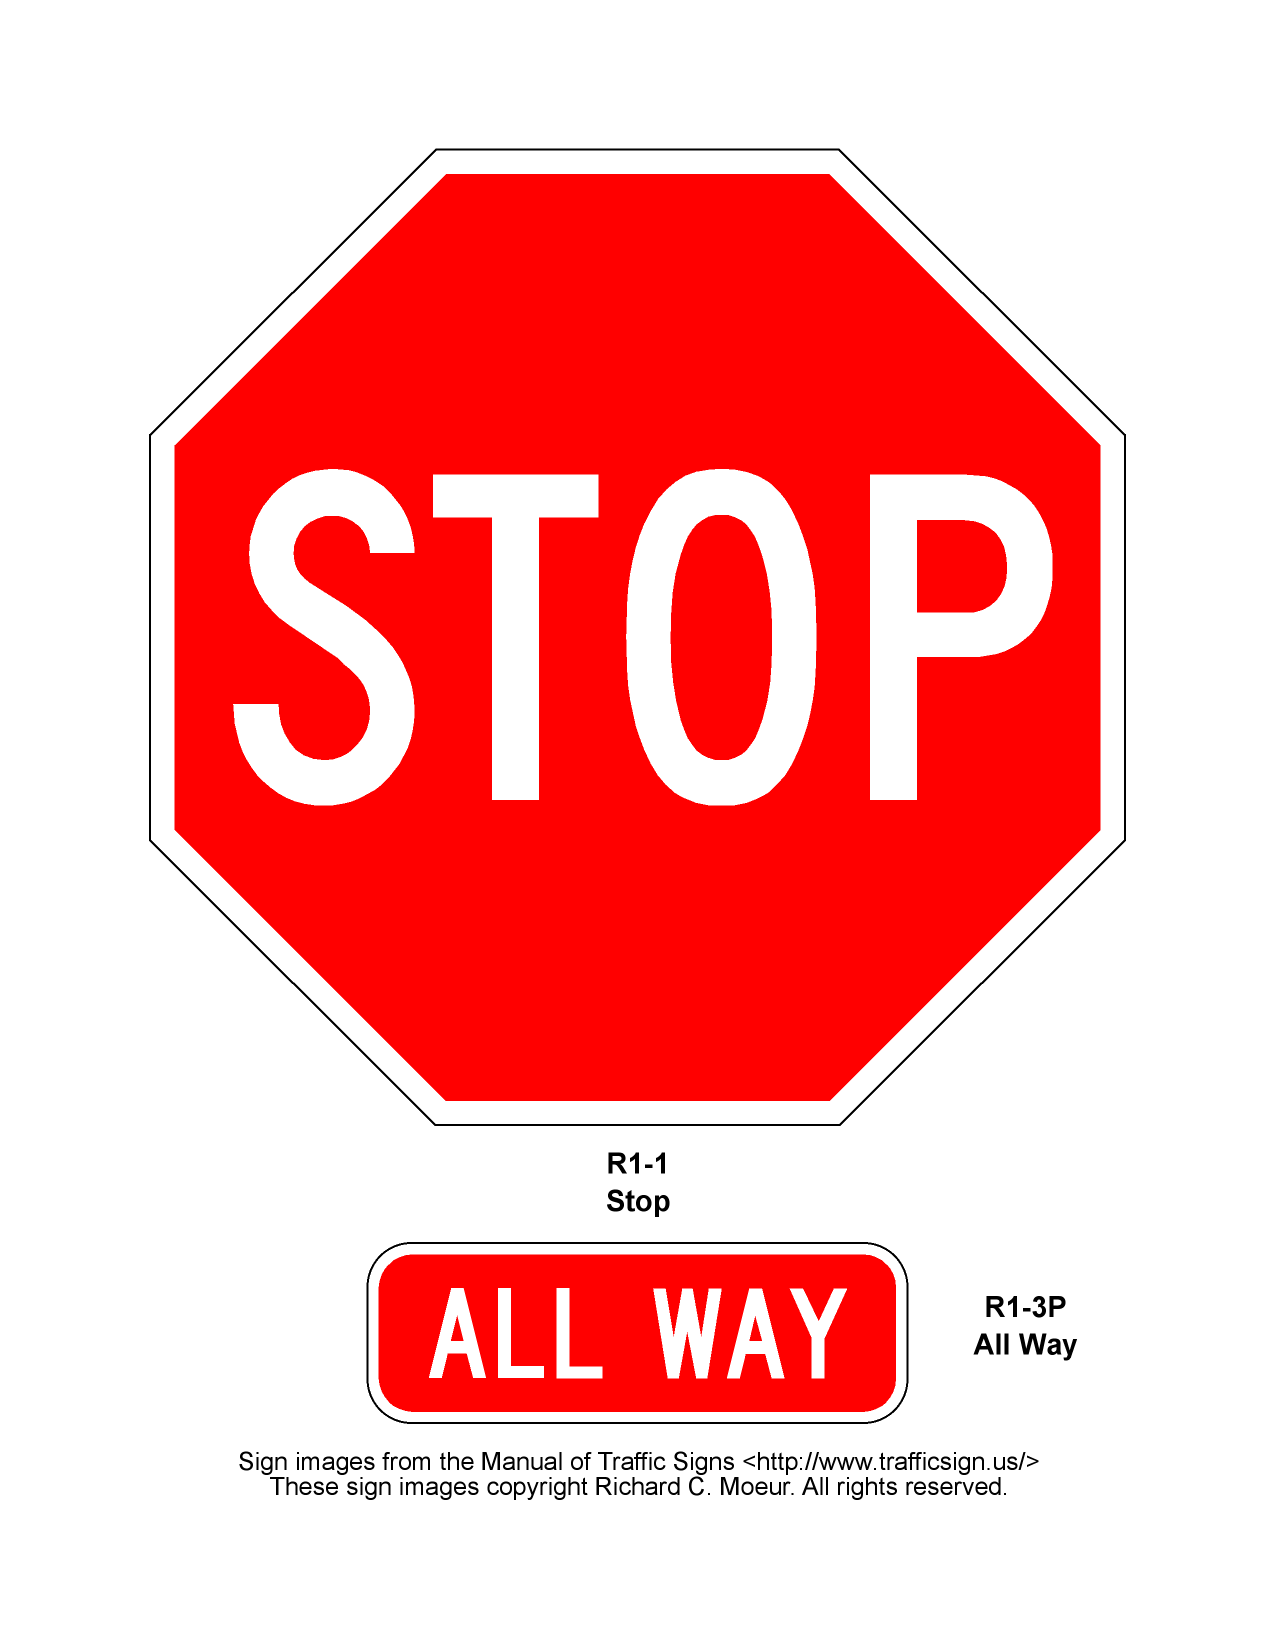 Manual of Traffic Signs - R1 Series Signs